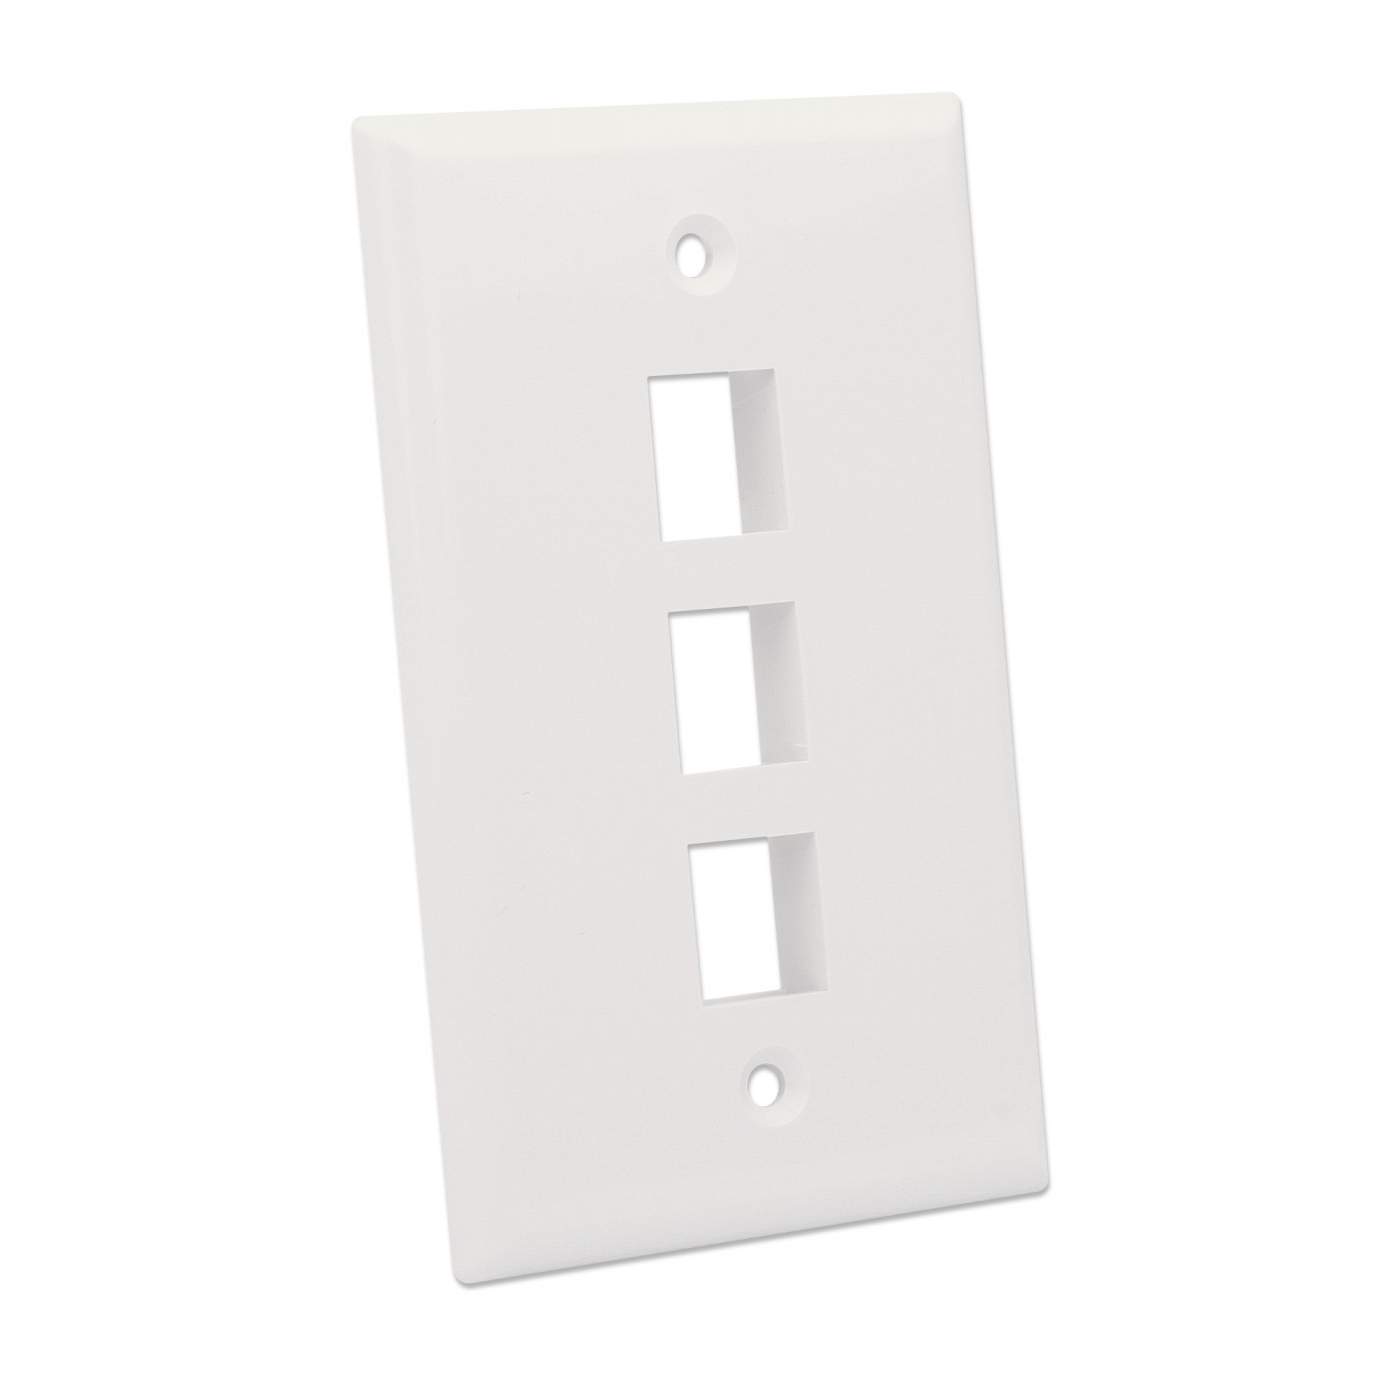 3-Outlet Keystone Wall Plate Image 2